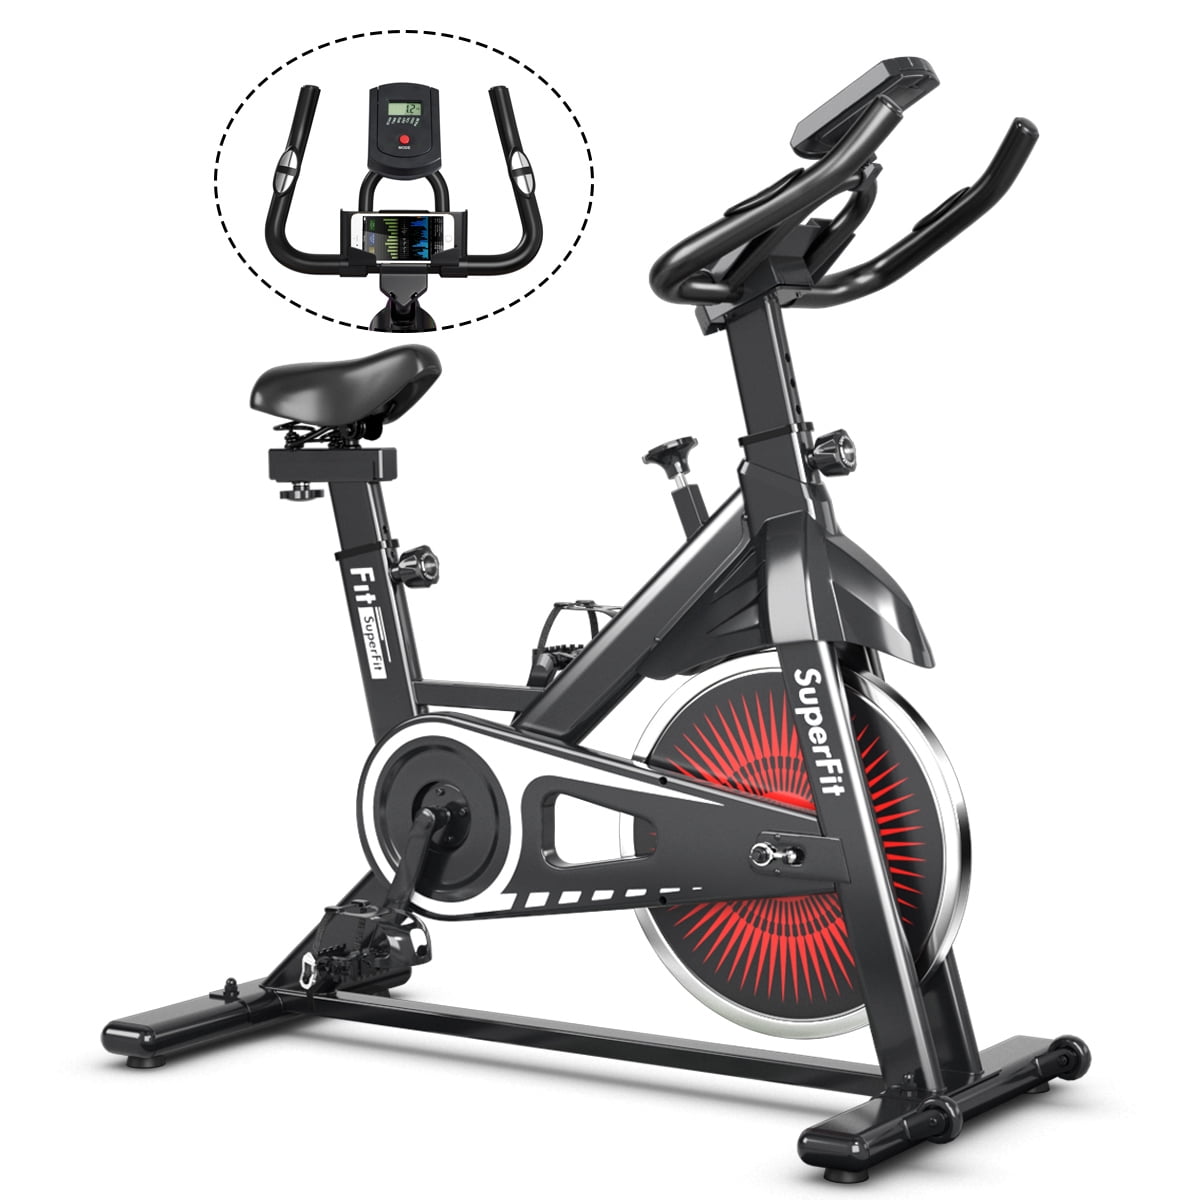 FITFIU Fitness Vélo Spinning 16 kg BESP-100 Silent Adultes Unisexe Cadre Suspension Pulsomètre